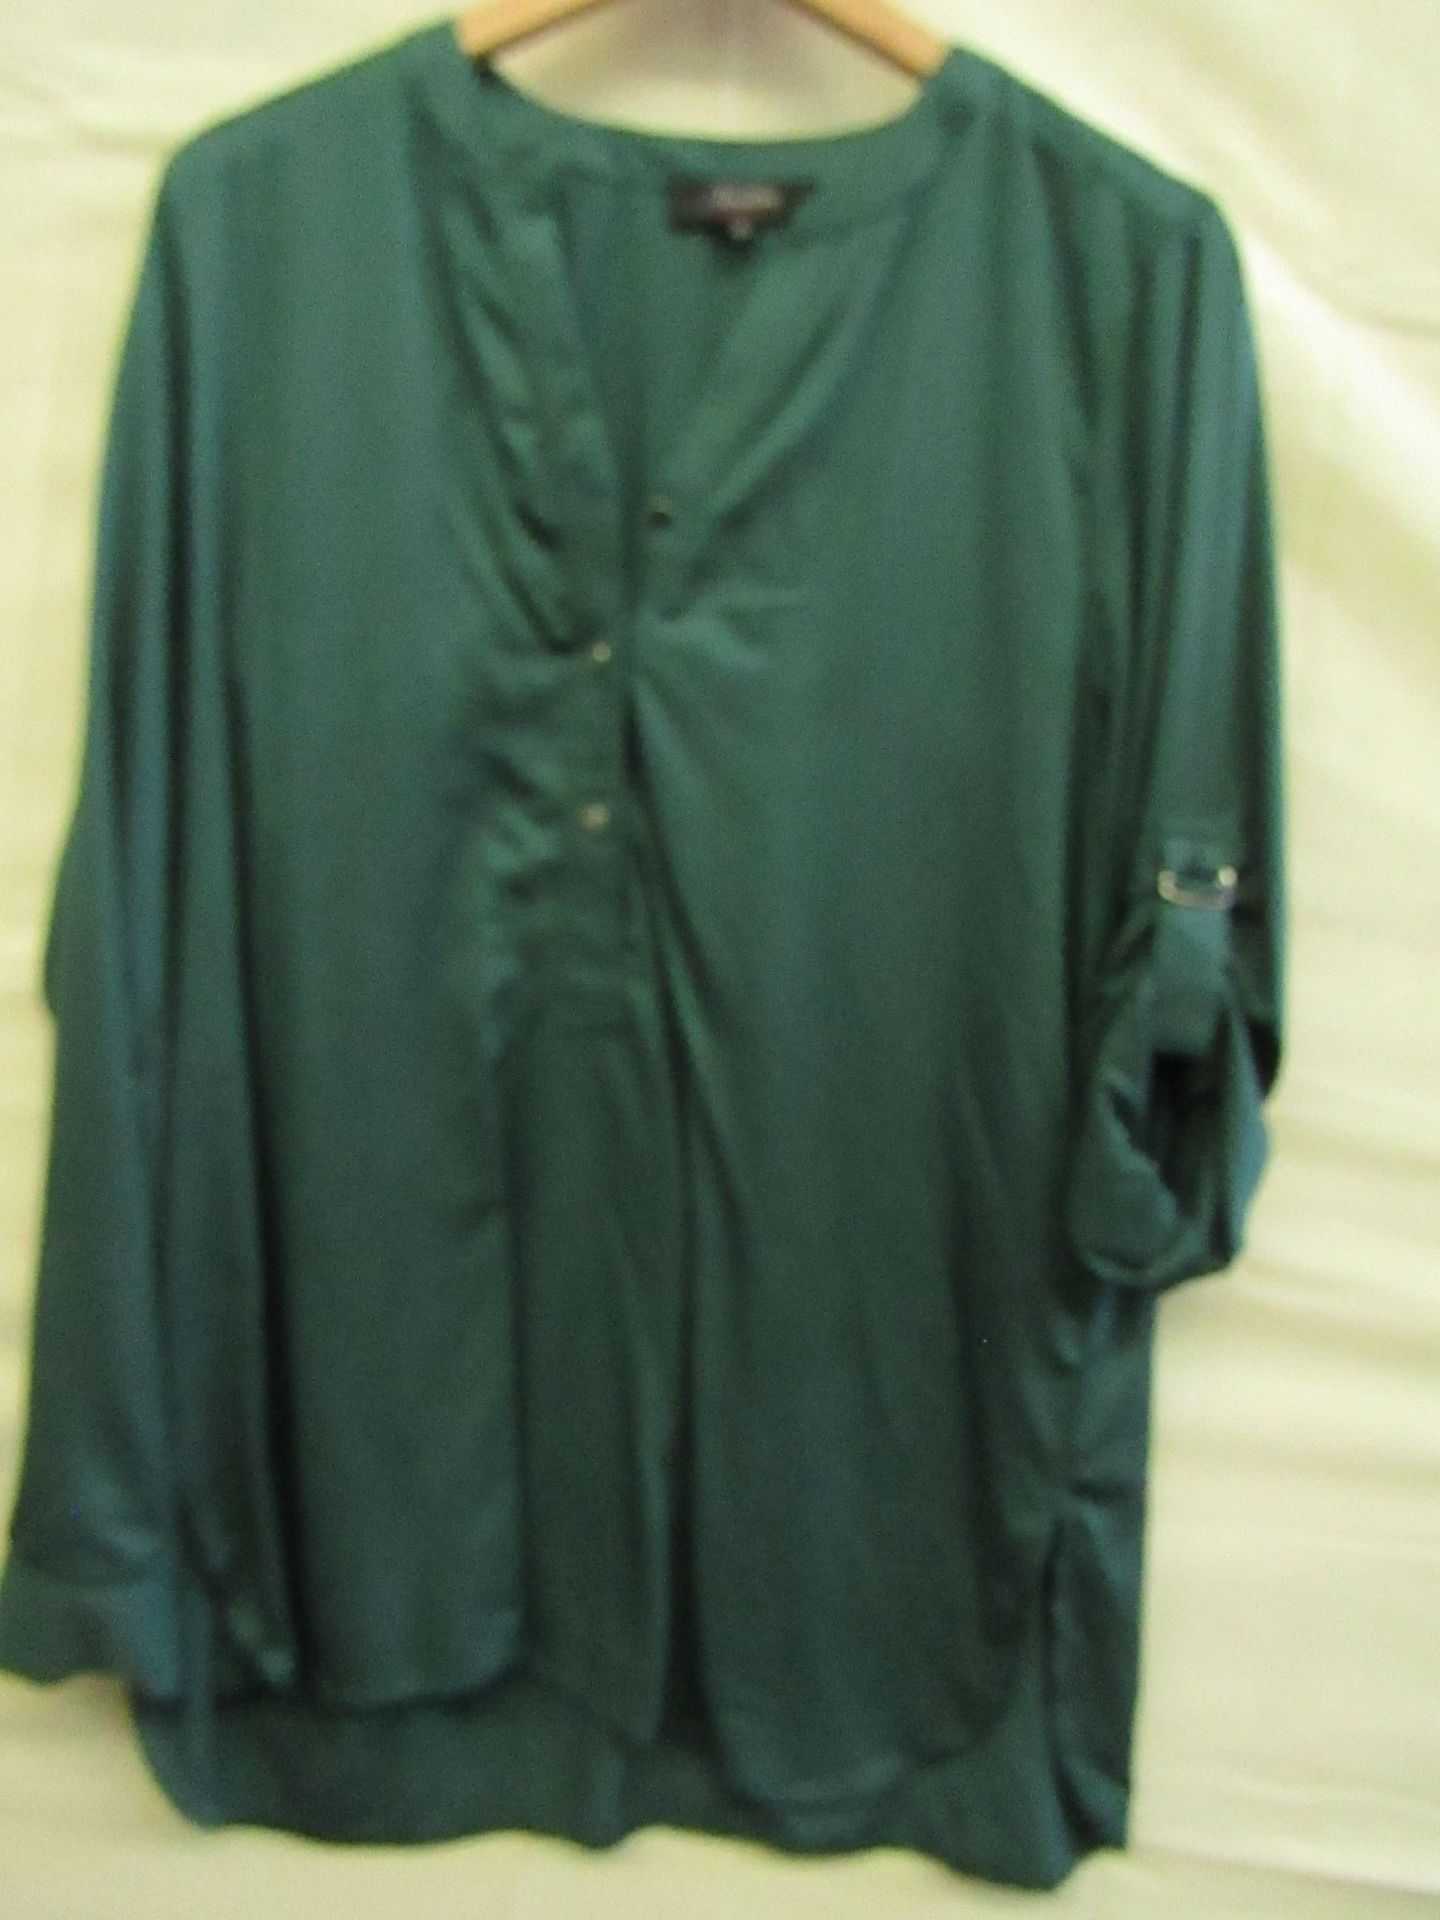 Aniston Casual Top green Size 14 Looks Unworn No Tags